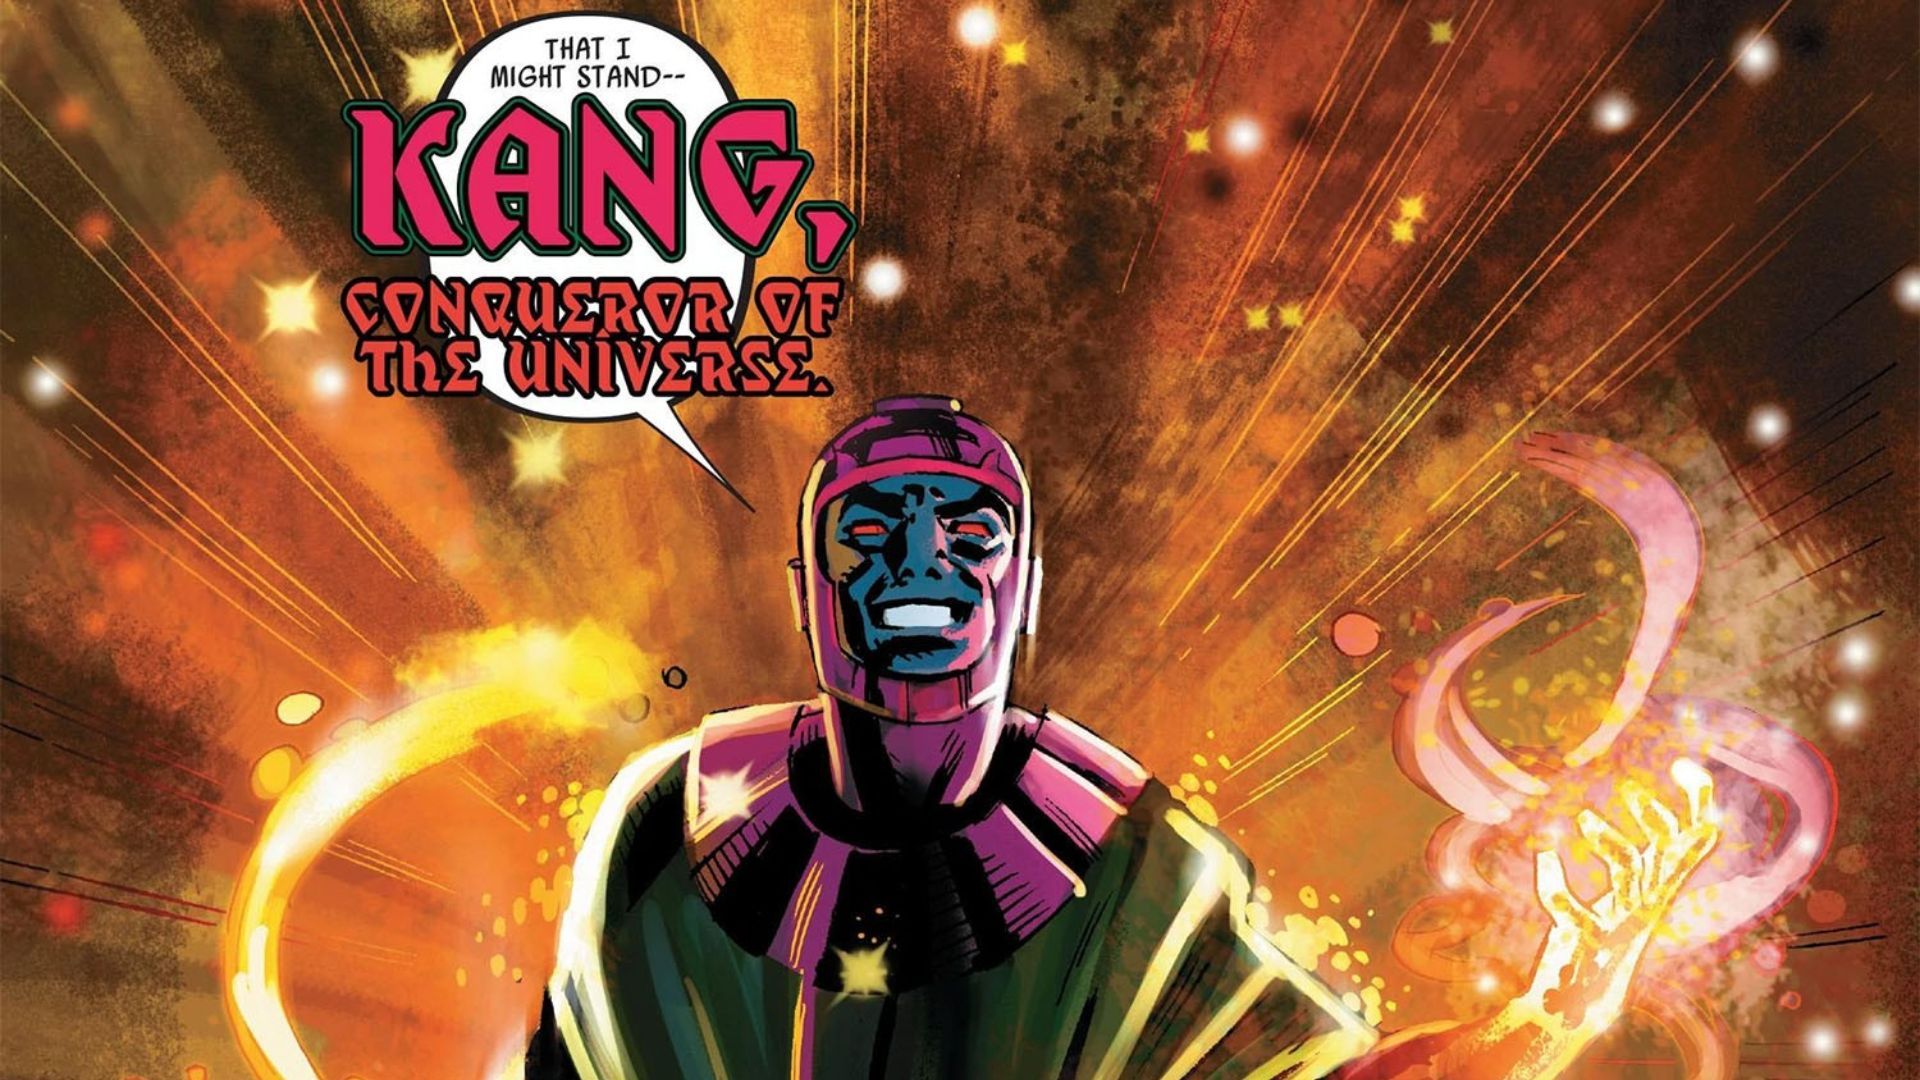 Who is Kang the Conqueror and what are his powers?